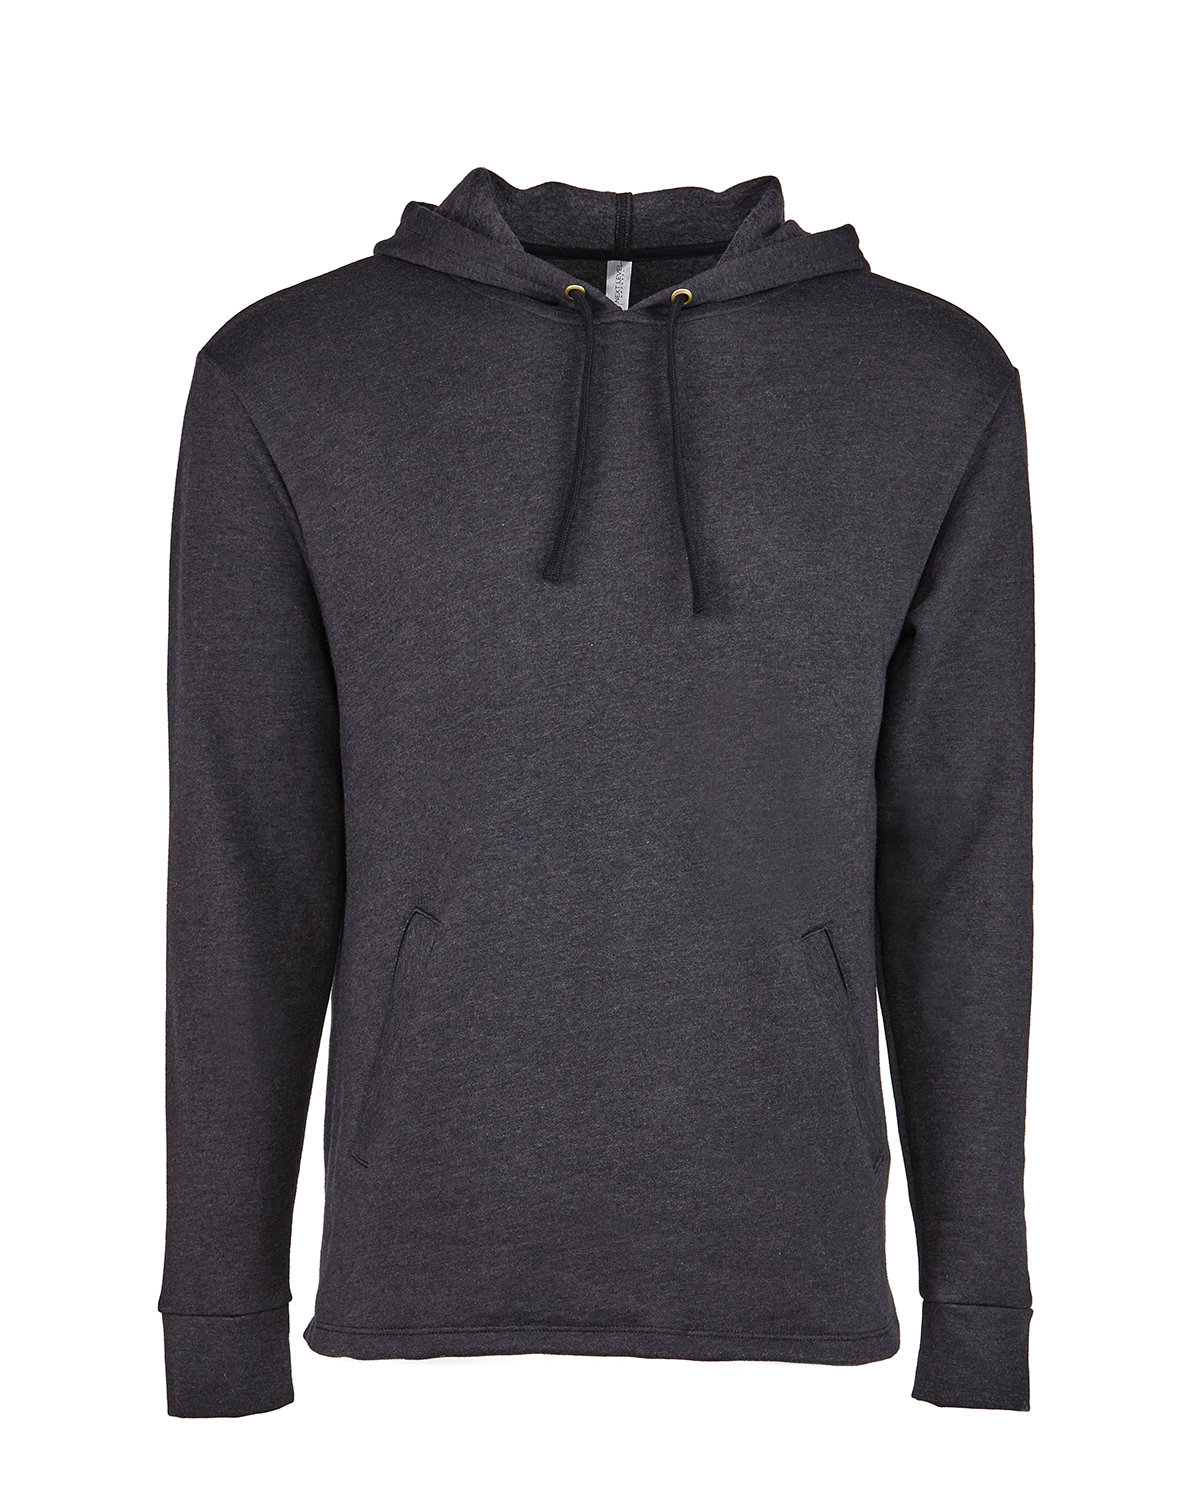 Next Level Apparel Adult PCH Pullover Hoodie | alphabroder